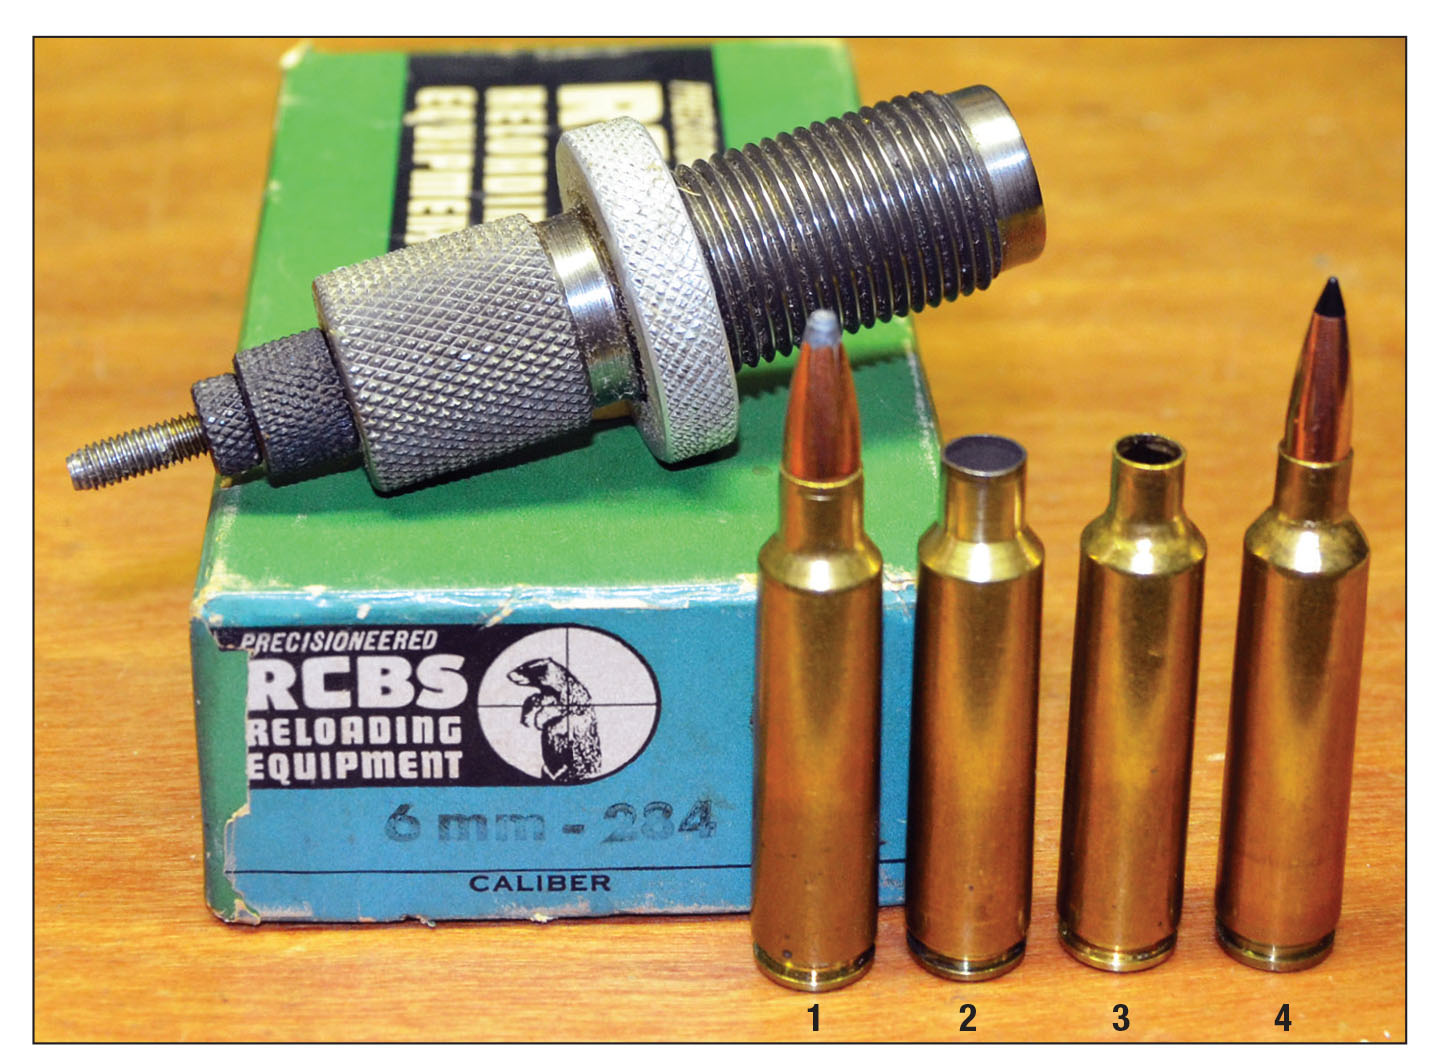 The 6mm-284 was originally formed by necking down Winchester .284 brass: (1) Winchester .284 cartridge, (2) Winchester .284 case, (3) case necked down with a 6mm-284 full-length resizing die and (4) 6mm-284 round loaded with a Swift 90-grain Scirocco II bullet.